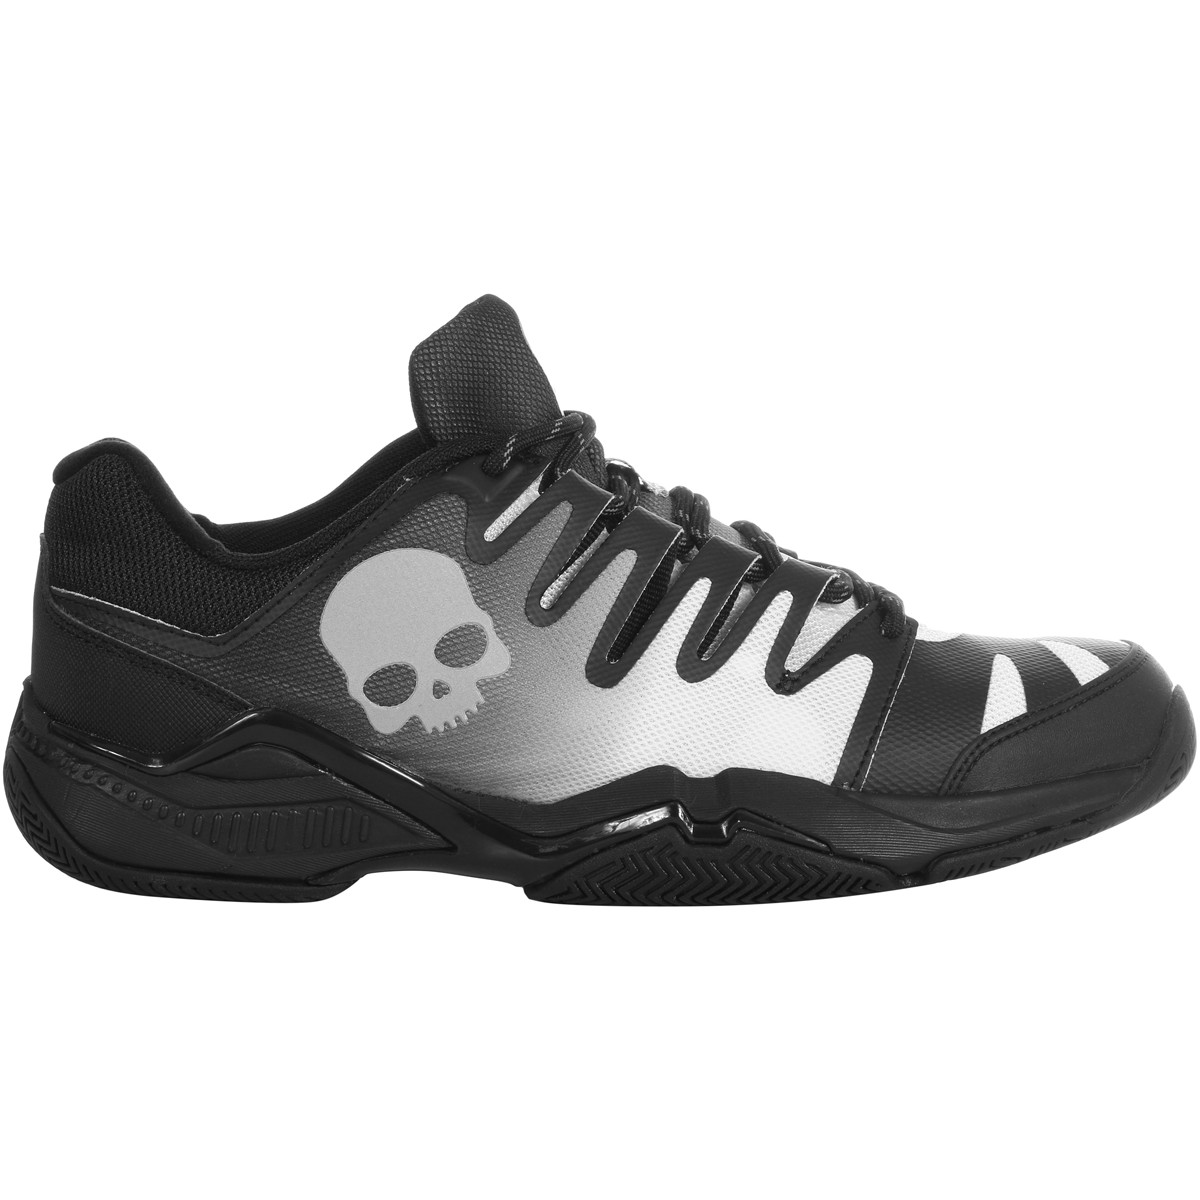 mens shoes for tennis